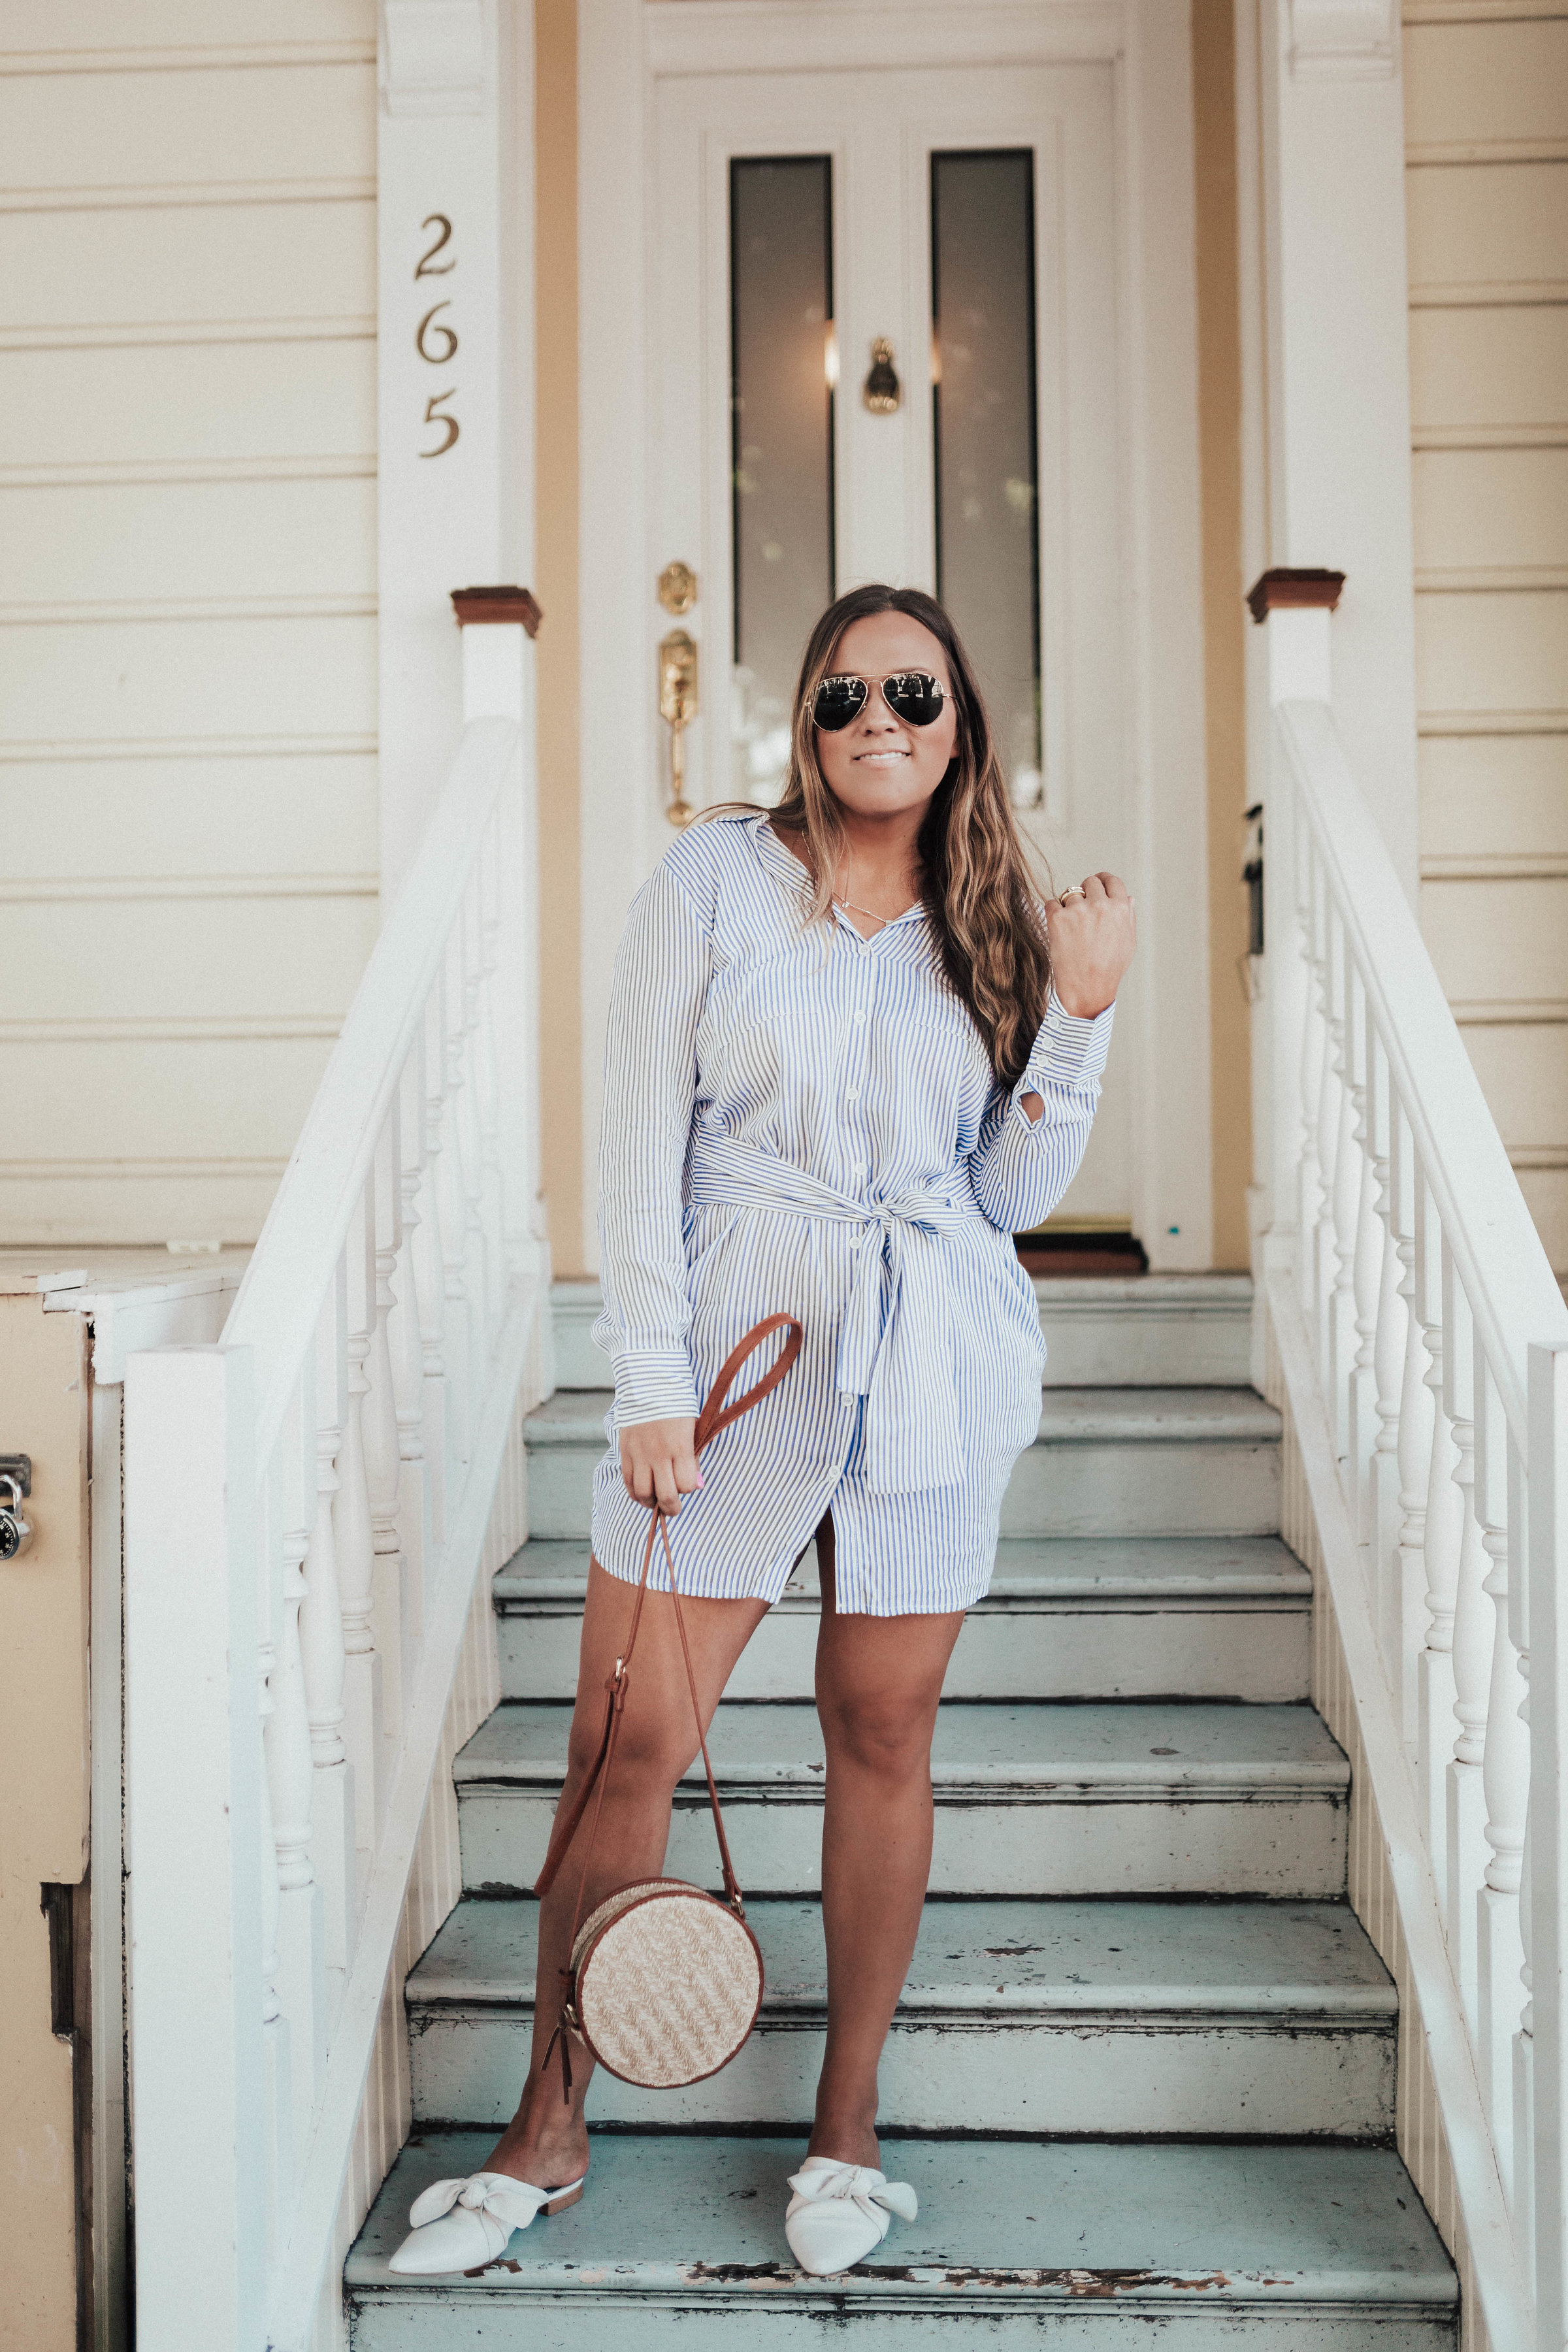 Ashley Zeal from Two Peas in a Prada shares their May Top Ten sellers featuring their best selling items from the month of May including this shirt dress!